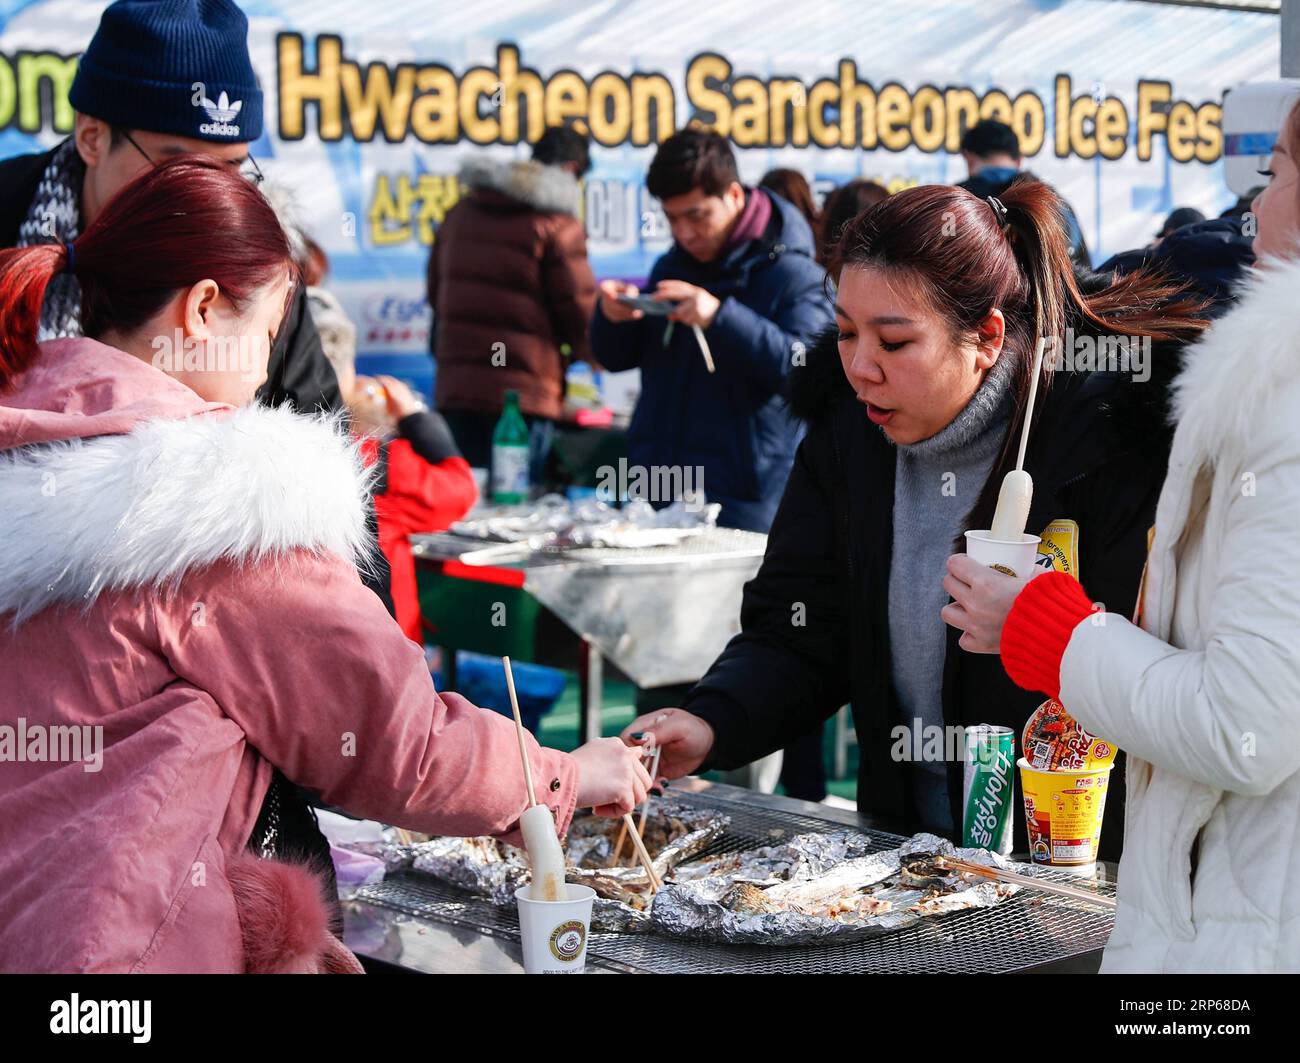 (190105) -- HWACHEON, Jan. 5, 2019 -- People enjoy grilled trouts by the side of a frozen river during the Sancheoneo Ice Festival in Hwacheon, South Korea, Jan. 5, 2019. As one of the biggest winter events in South Korea, the annual three-week festival draws people to the frozen Hwacheon river, where organizers drill fishing holes in the ice and release trouts into the river during the festival period. This year the festival lasts from Jan. 5 to Jan. 27. ) SOUTH KOREA-HWACHEON-SANCHEONEO ICE FESTIVAL WangxJingqiang PUBLICATIONxNOTxINxCHN Stock Photo